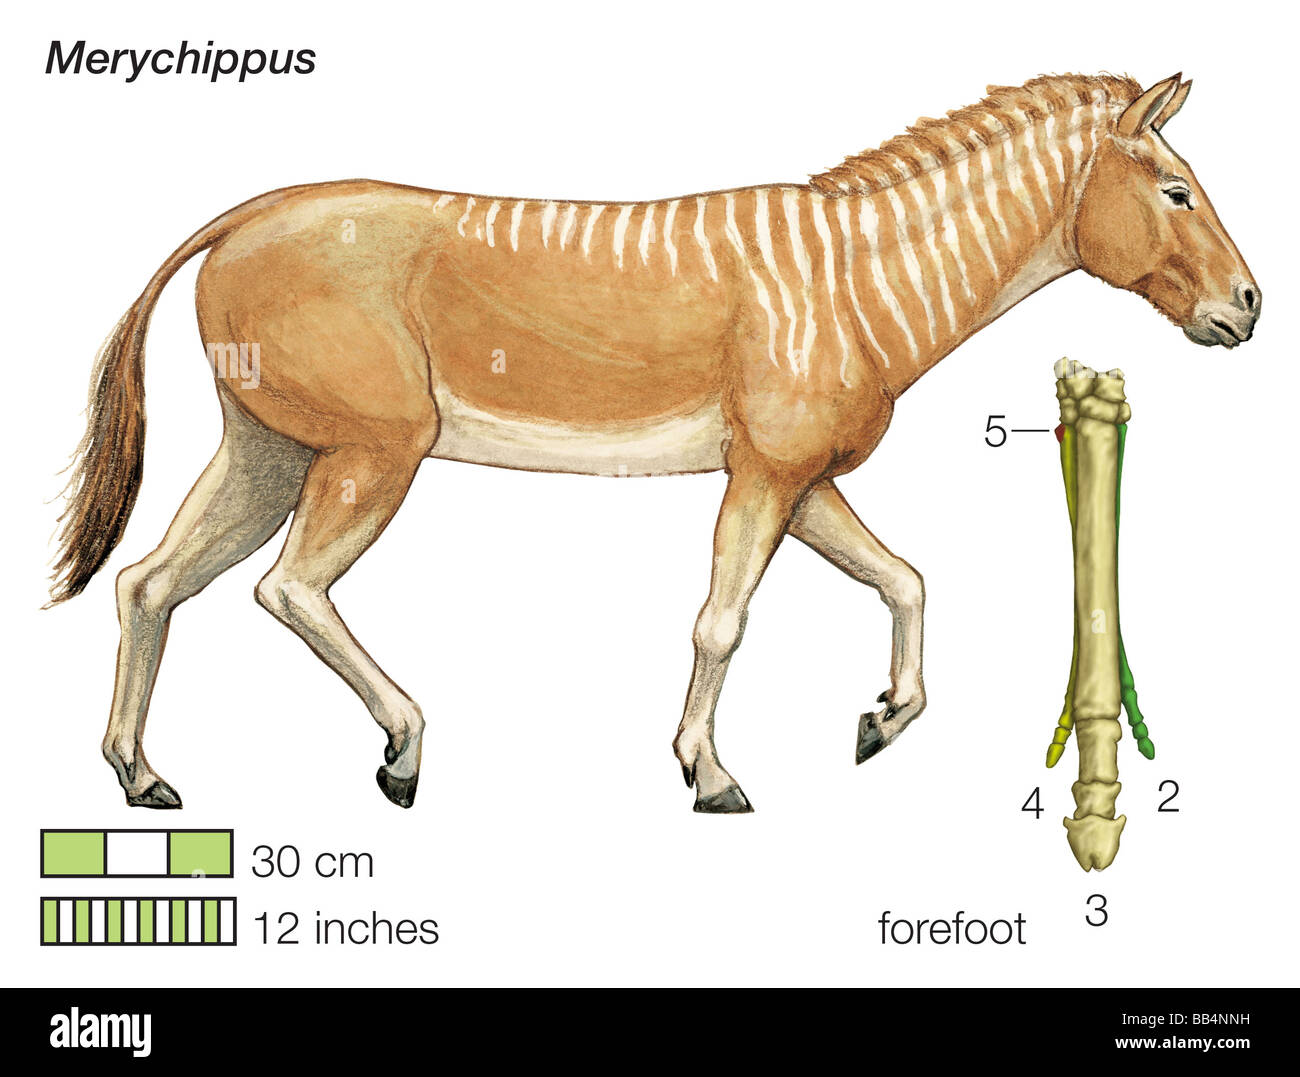 The ancestral horse Merychippus. Existing toe bones of the forefoot are numbered outward from the centre of the body. Stock Photo